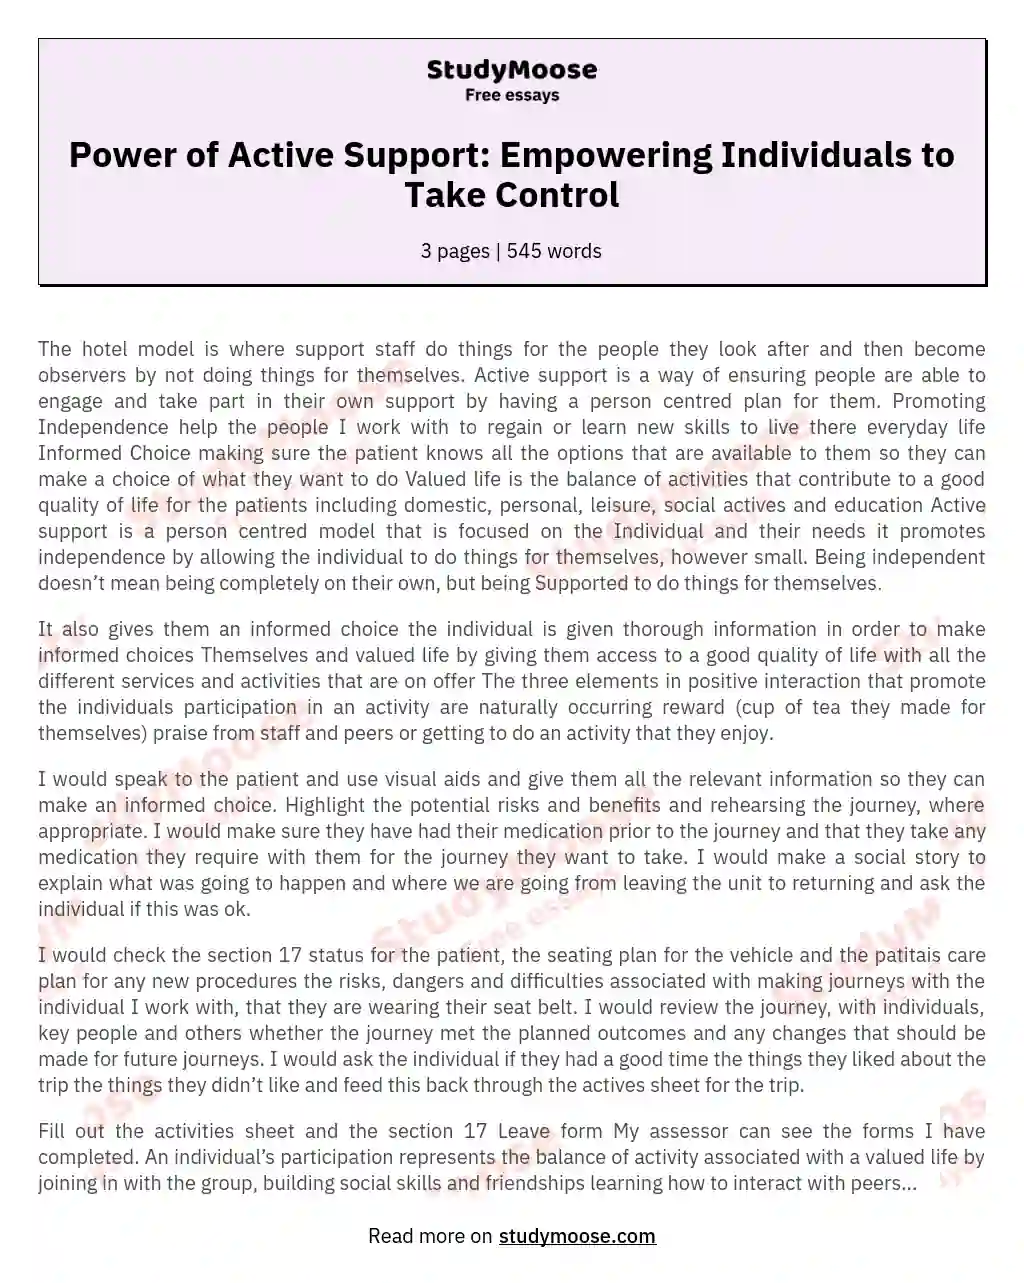 Power of Active Support: Empowering Individuals to Take Control essay